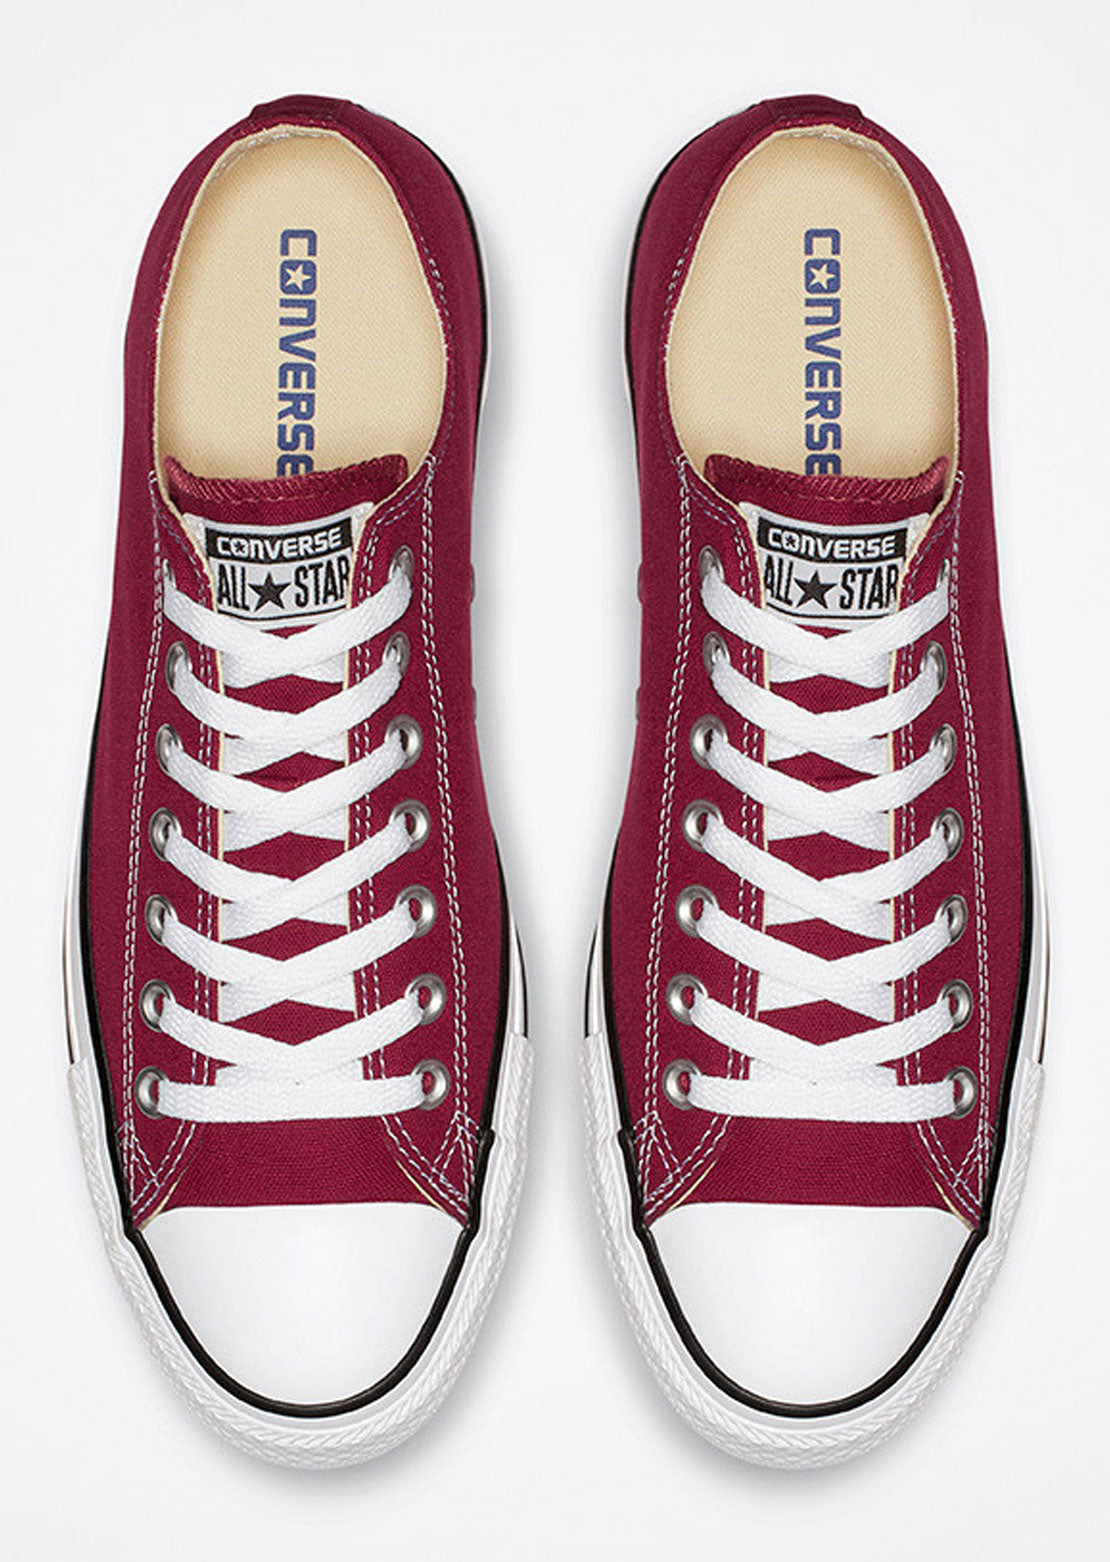 Converse Unisex Chuck Taylor All Star Low Top Shoes Maroon